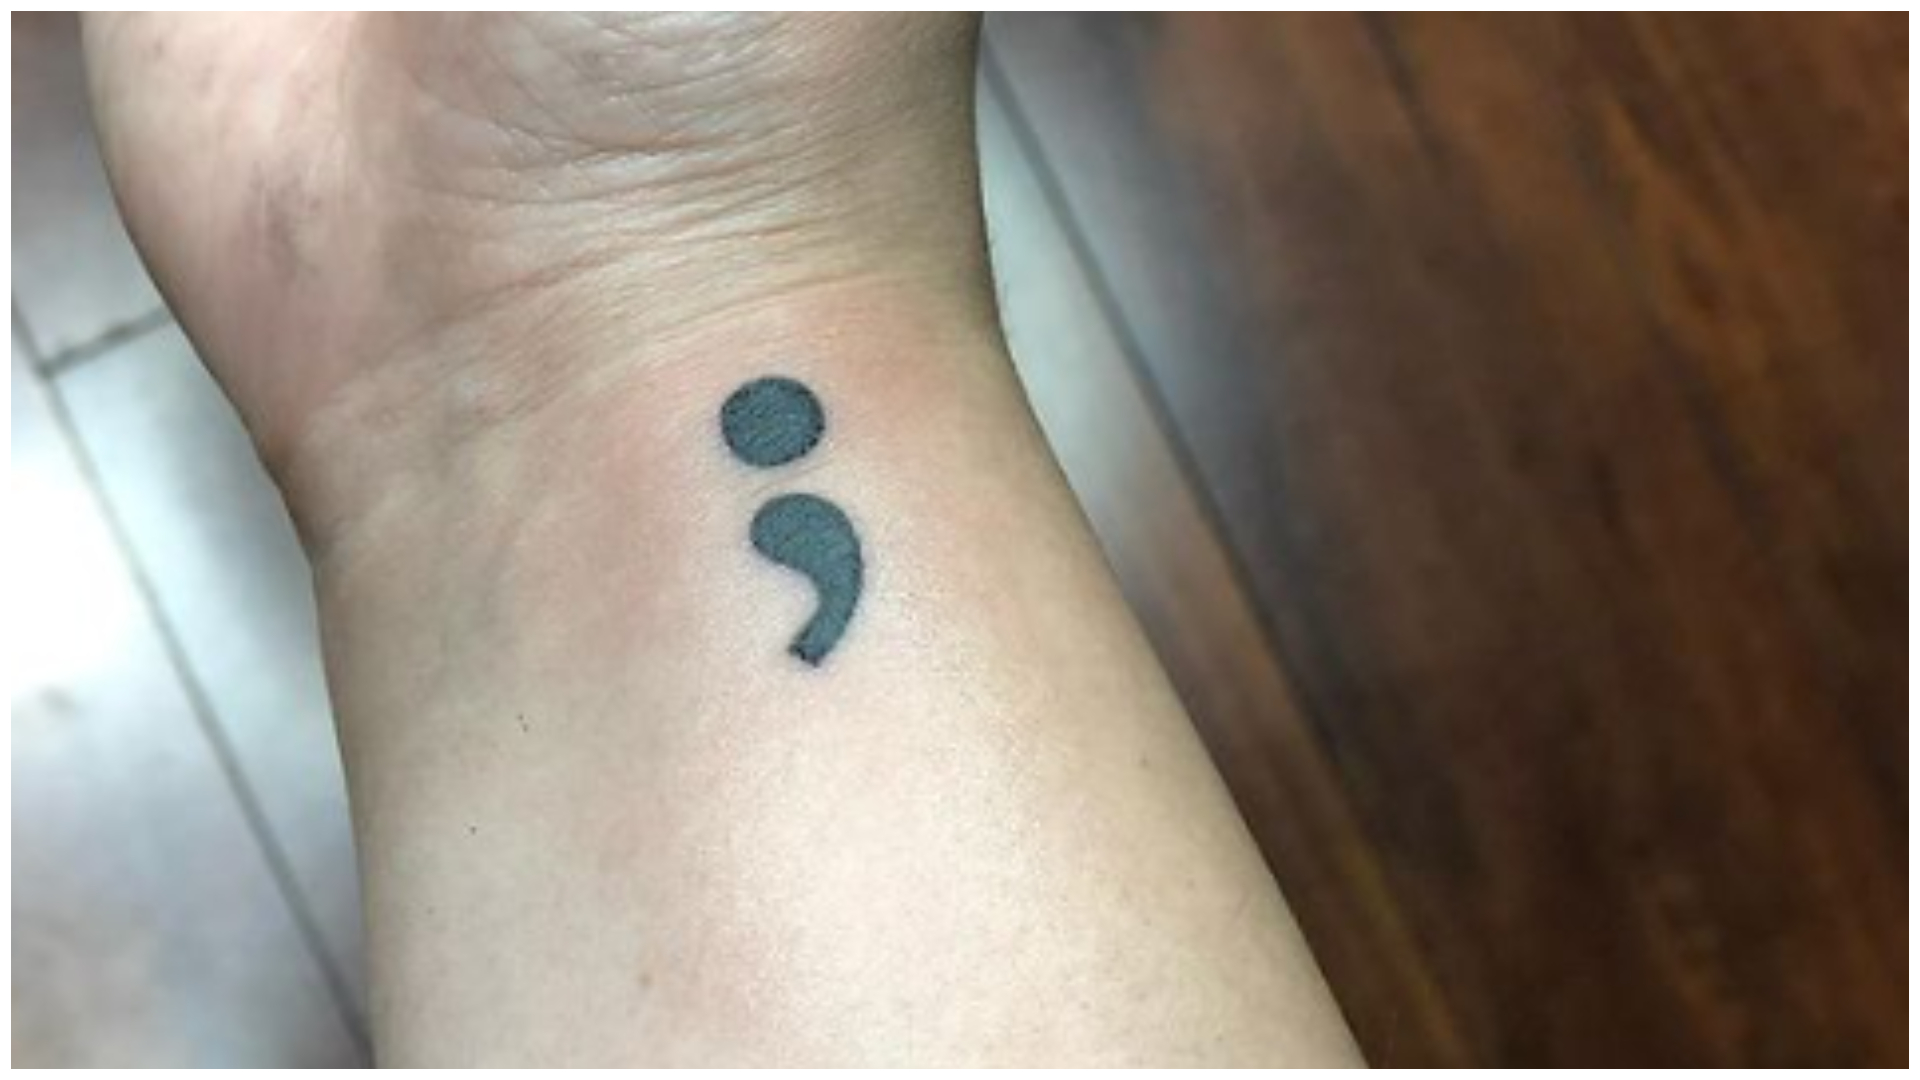 Semicolon tattoos are more than just ink